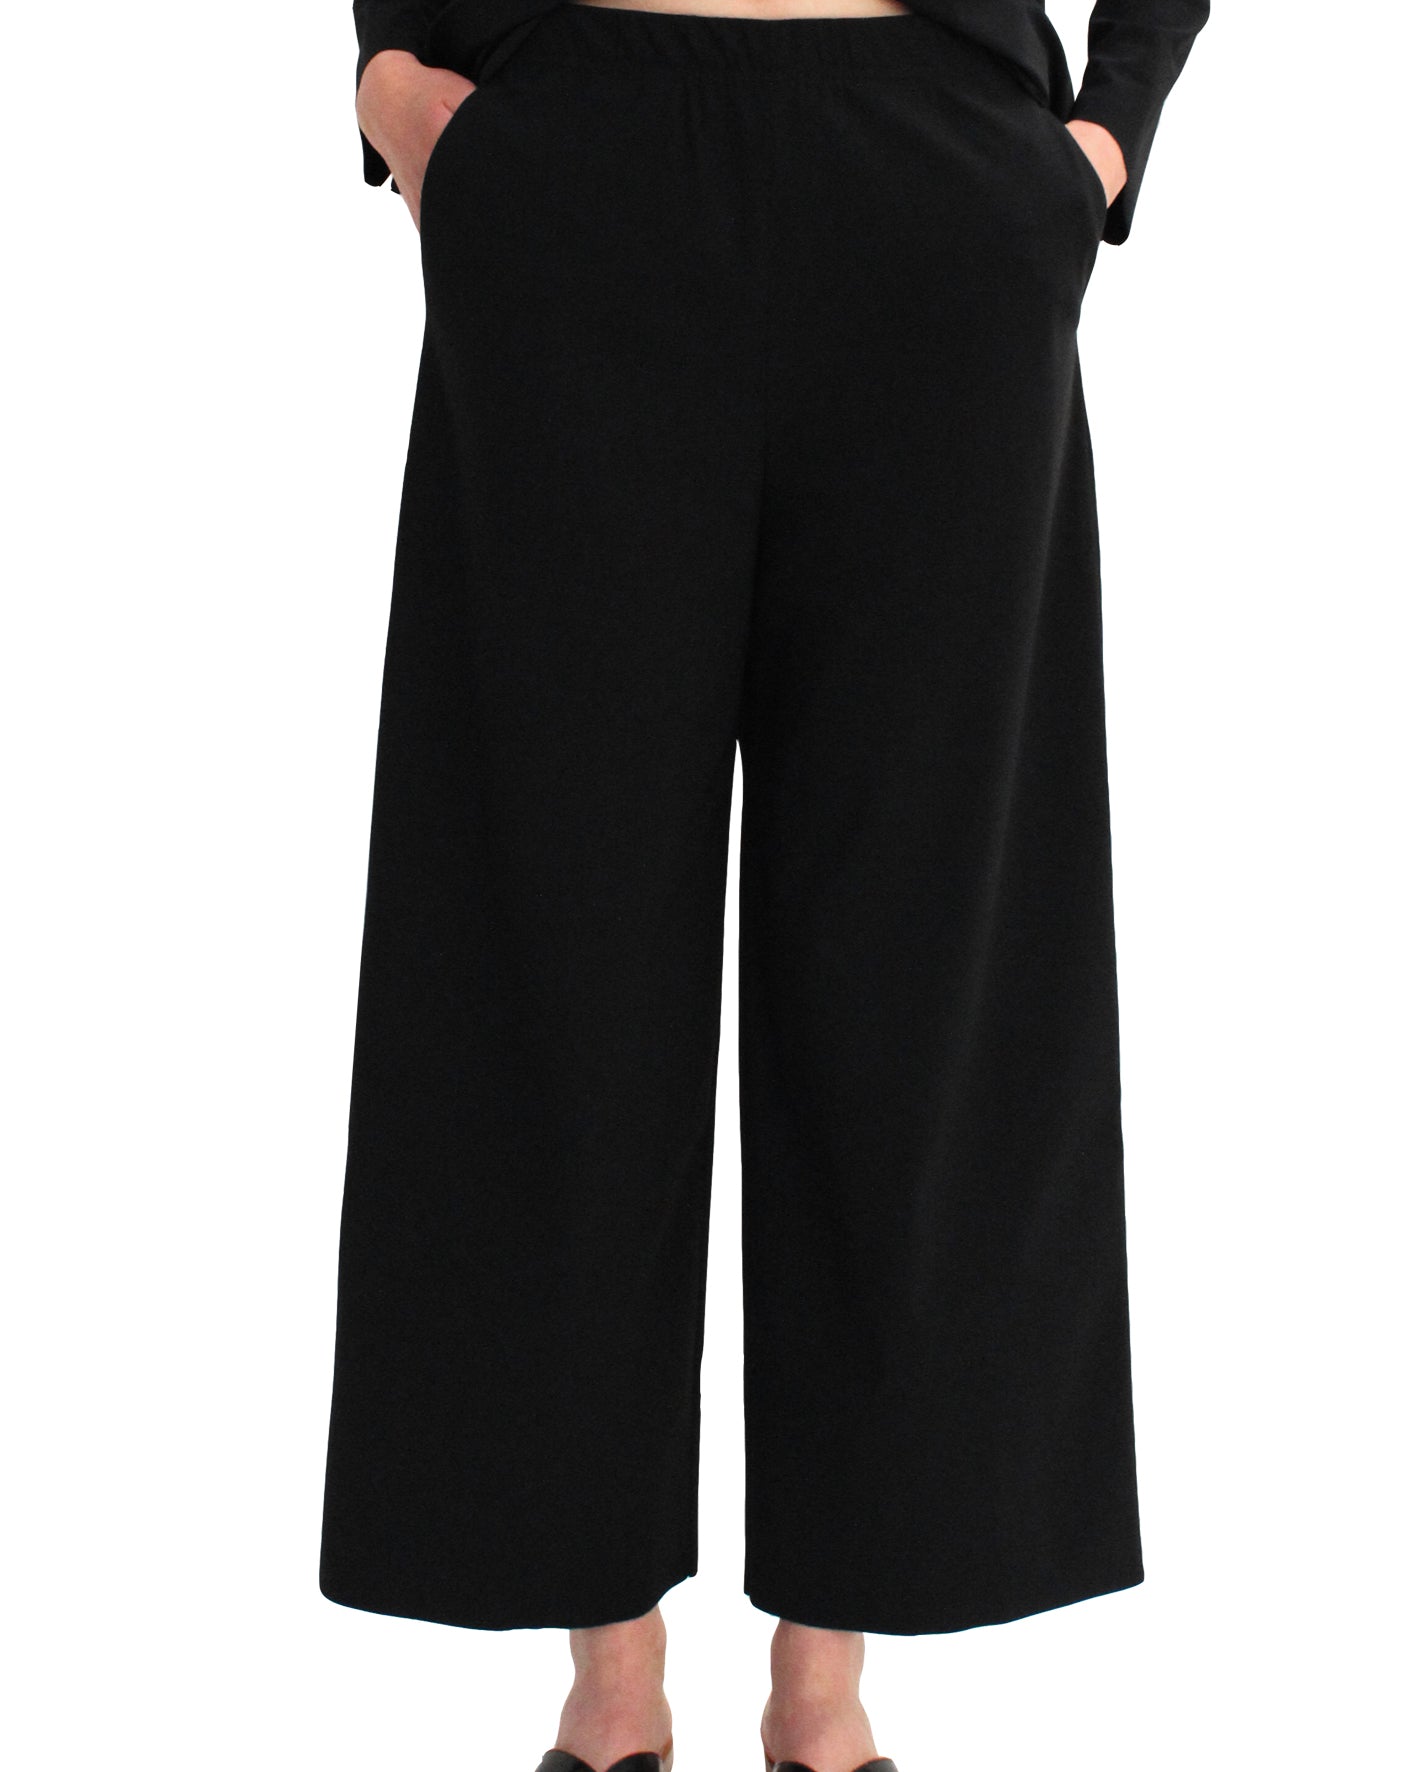 CROPPED TROUSERS, Black